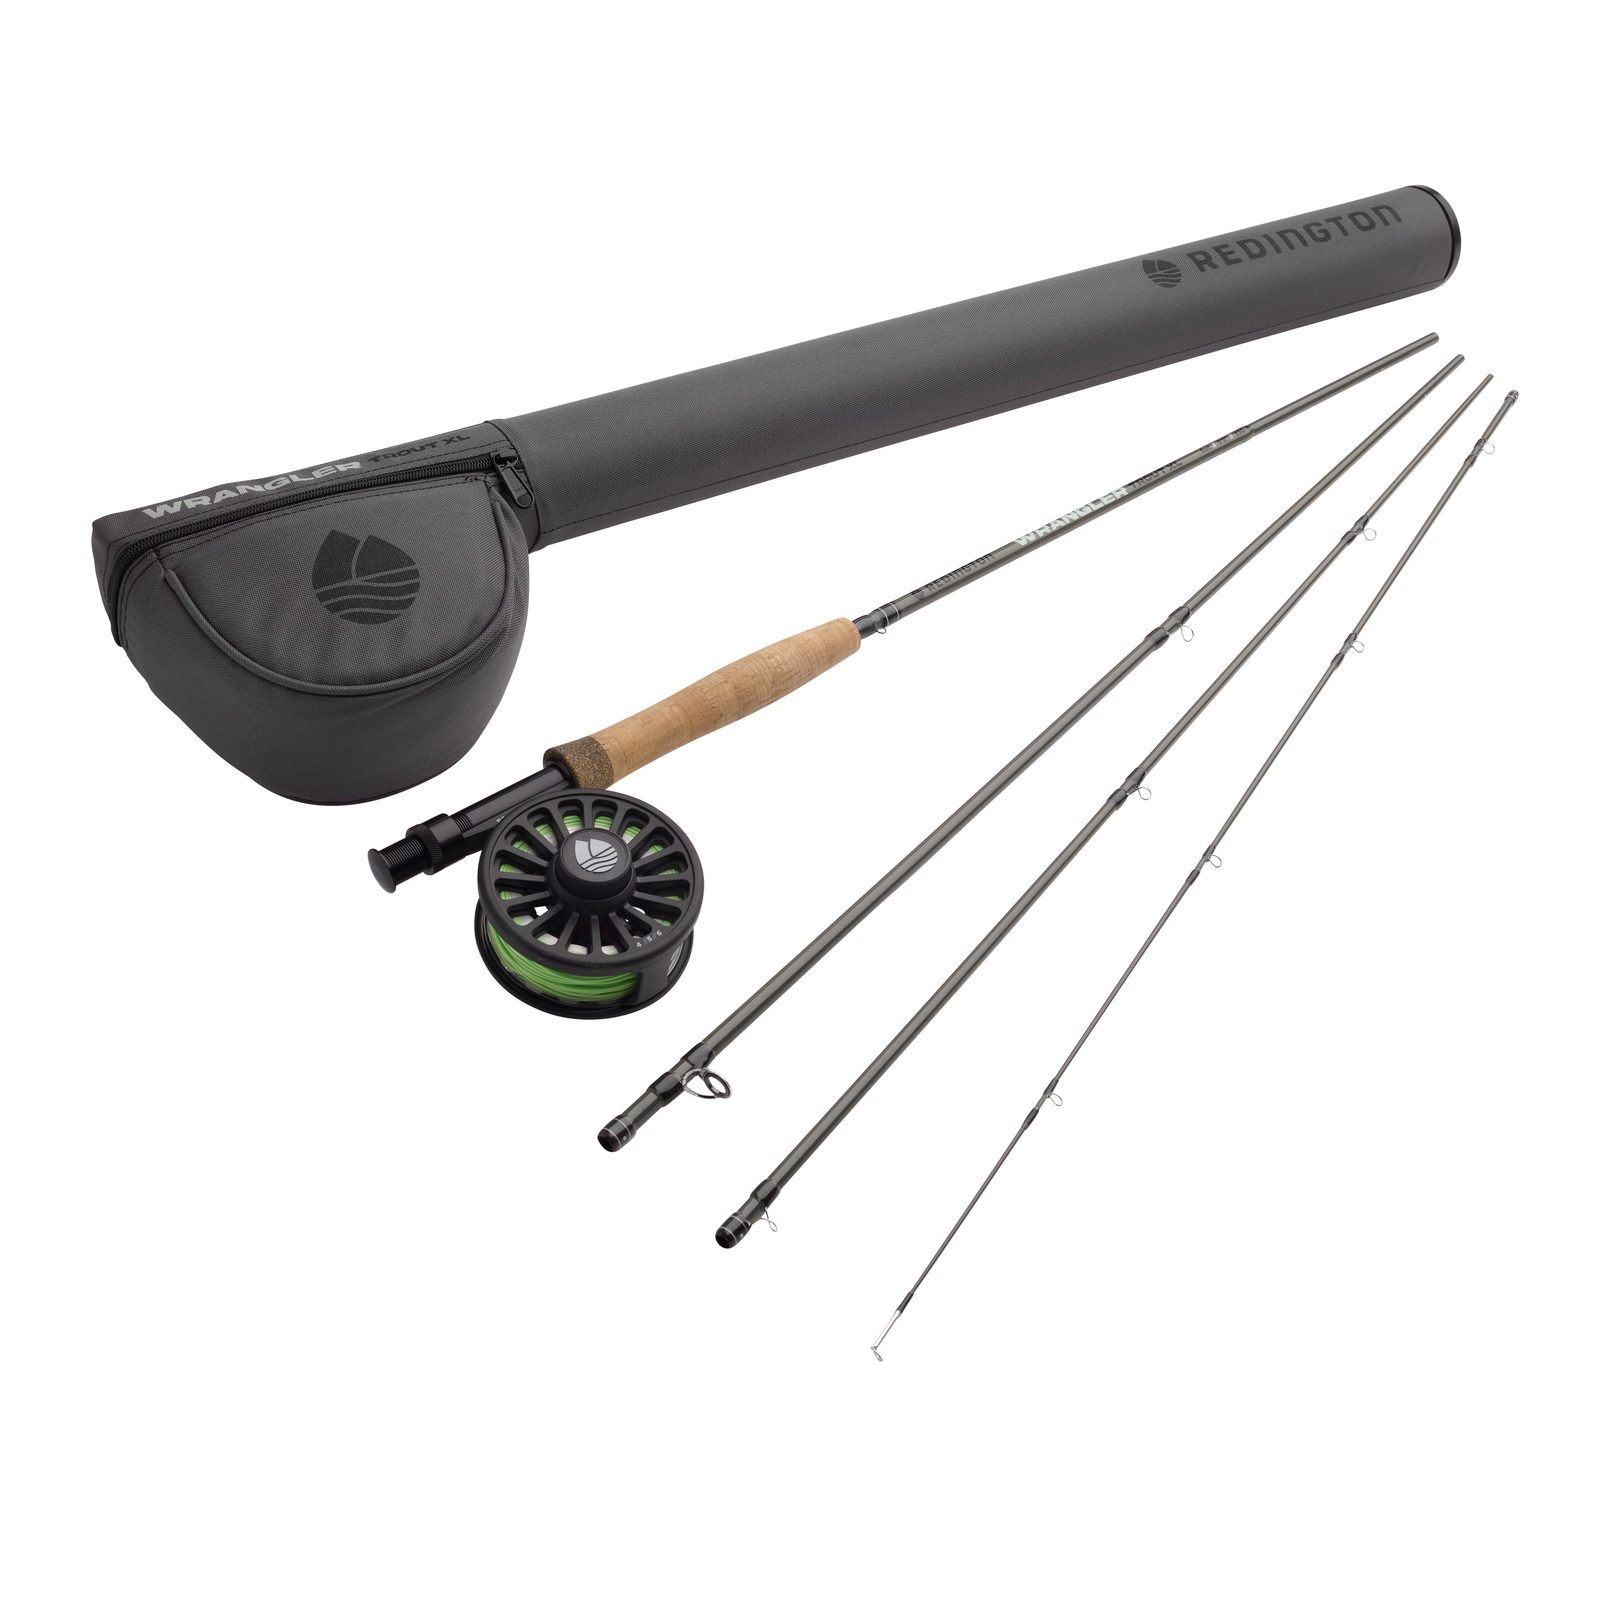 Sage X 5101-4 Fly Rod - 10' w/fight butt - 5wt - 4pc - NEW - Free Fly Line